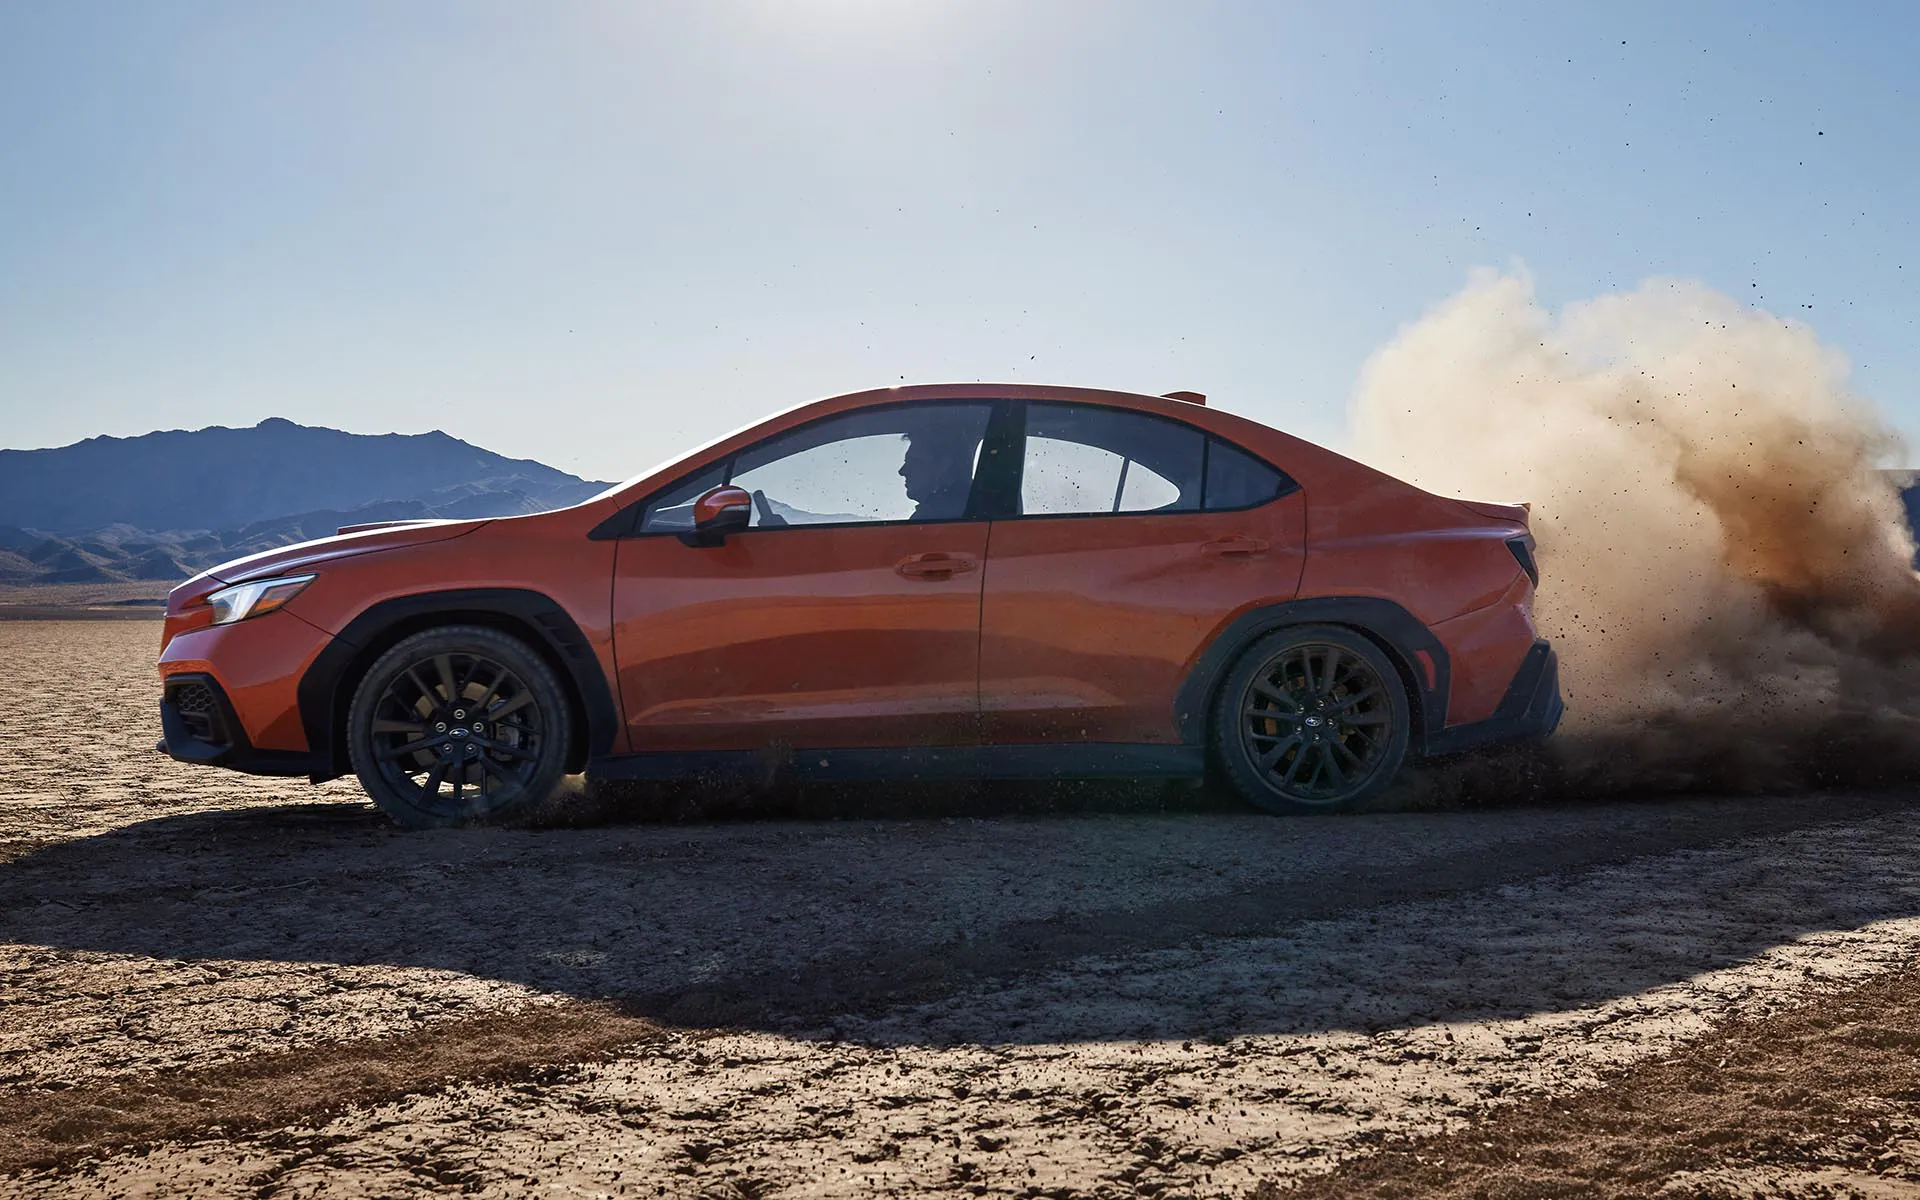 The 2022 Subaru kicking up dirt while driving on a desert road